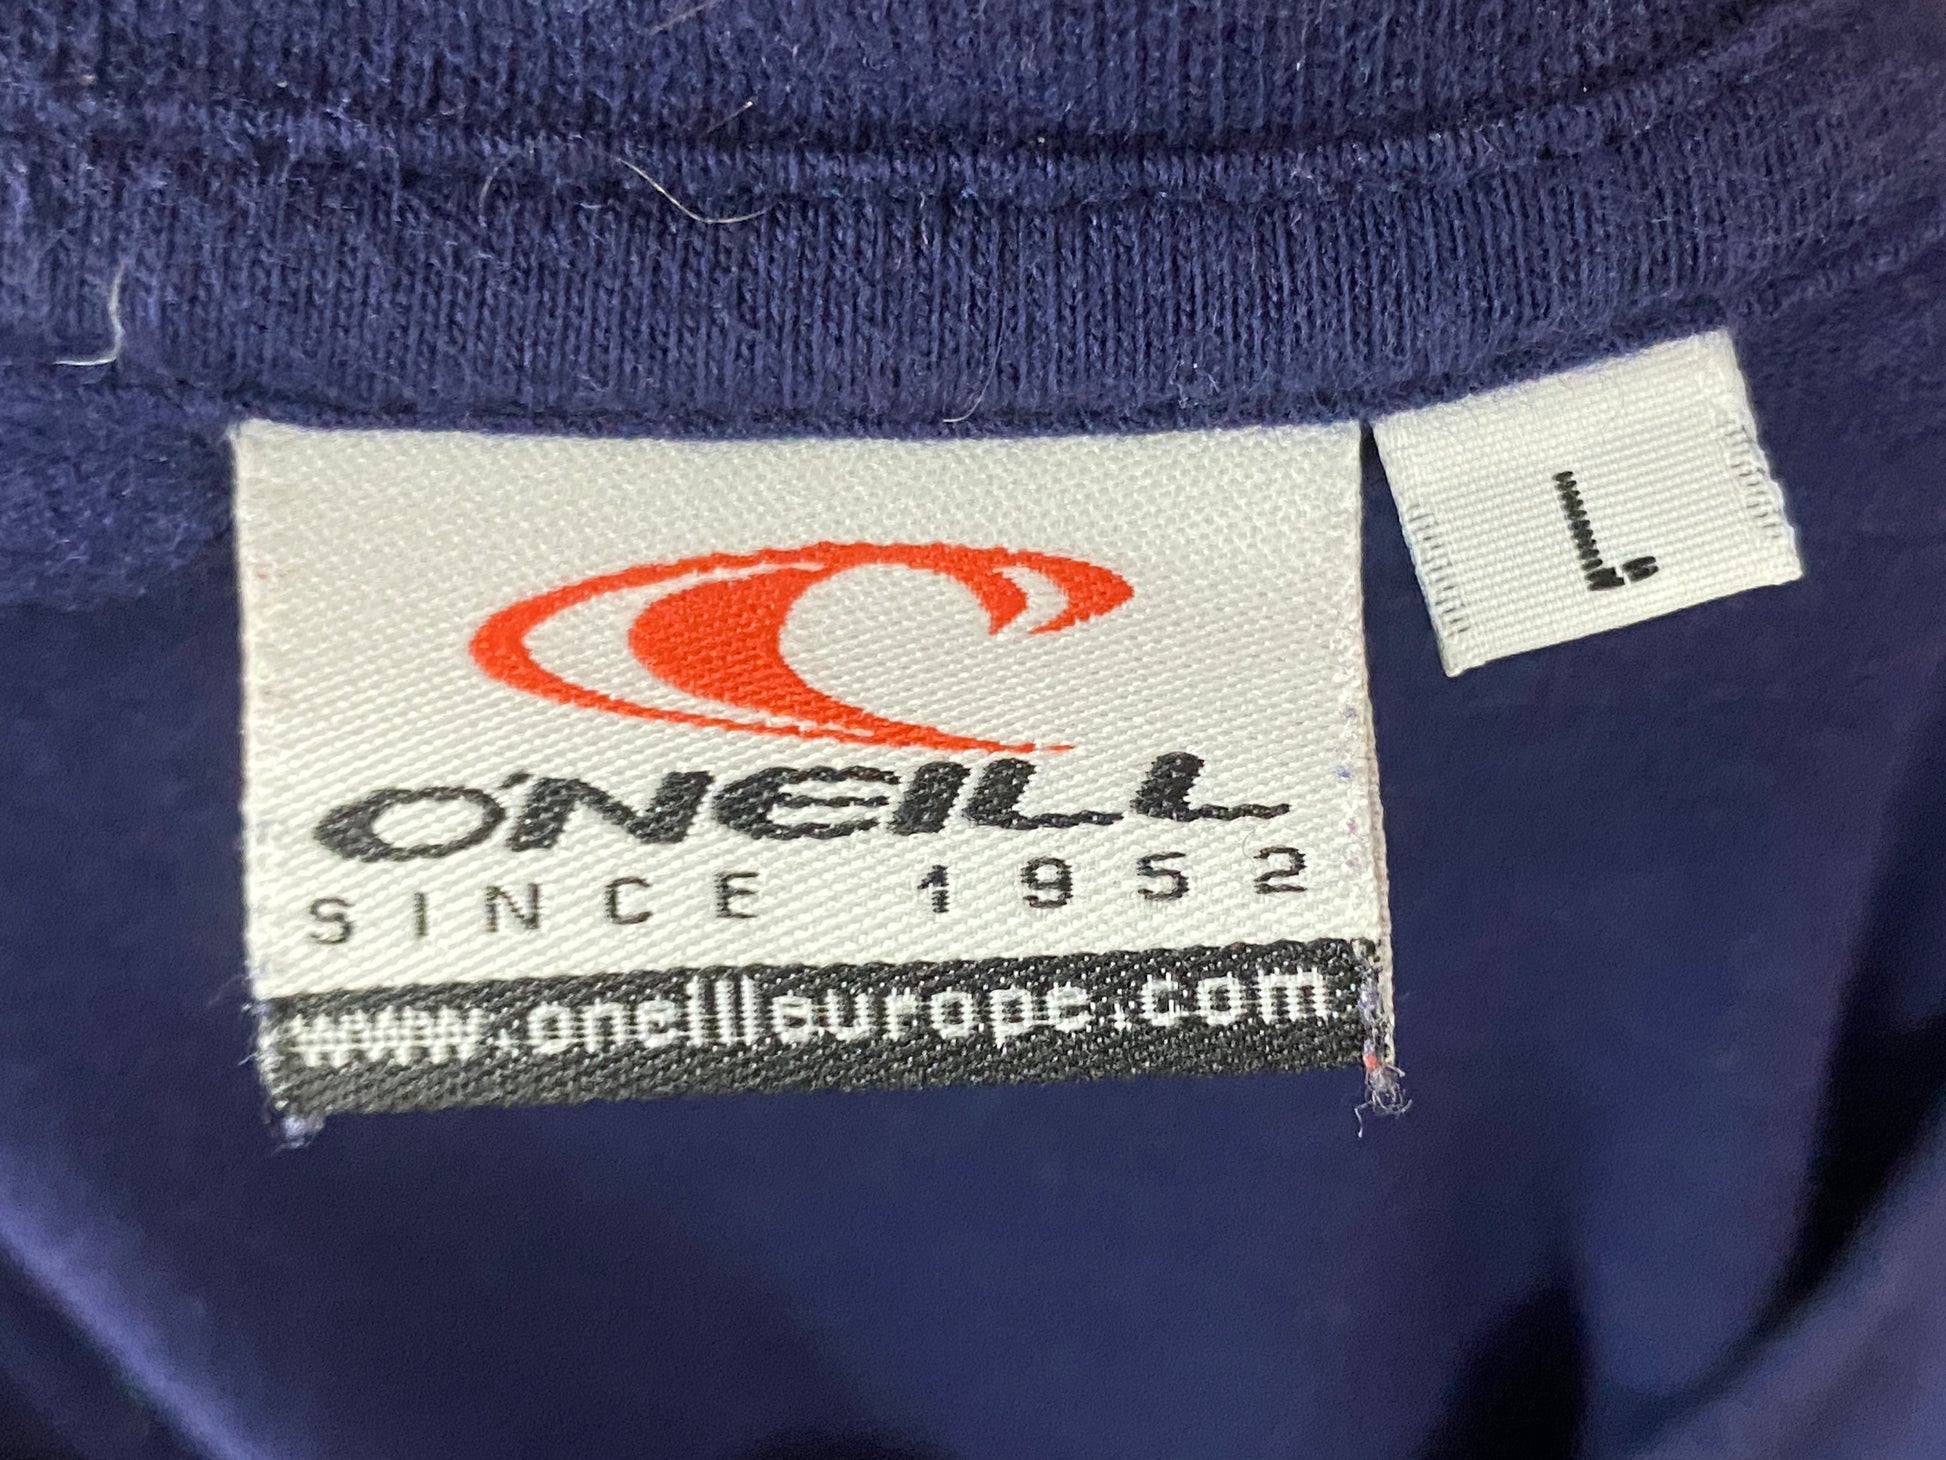 O'neill Vintage Men's Long Sleeve - Large Navy Blue Cotton